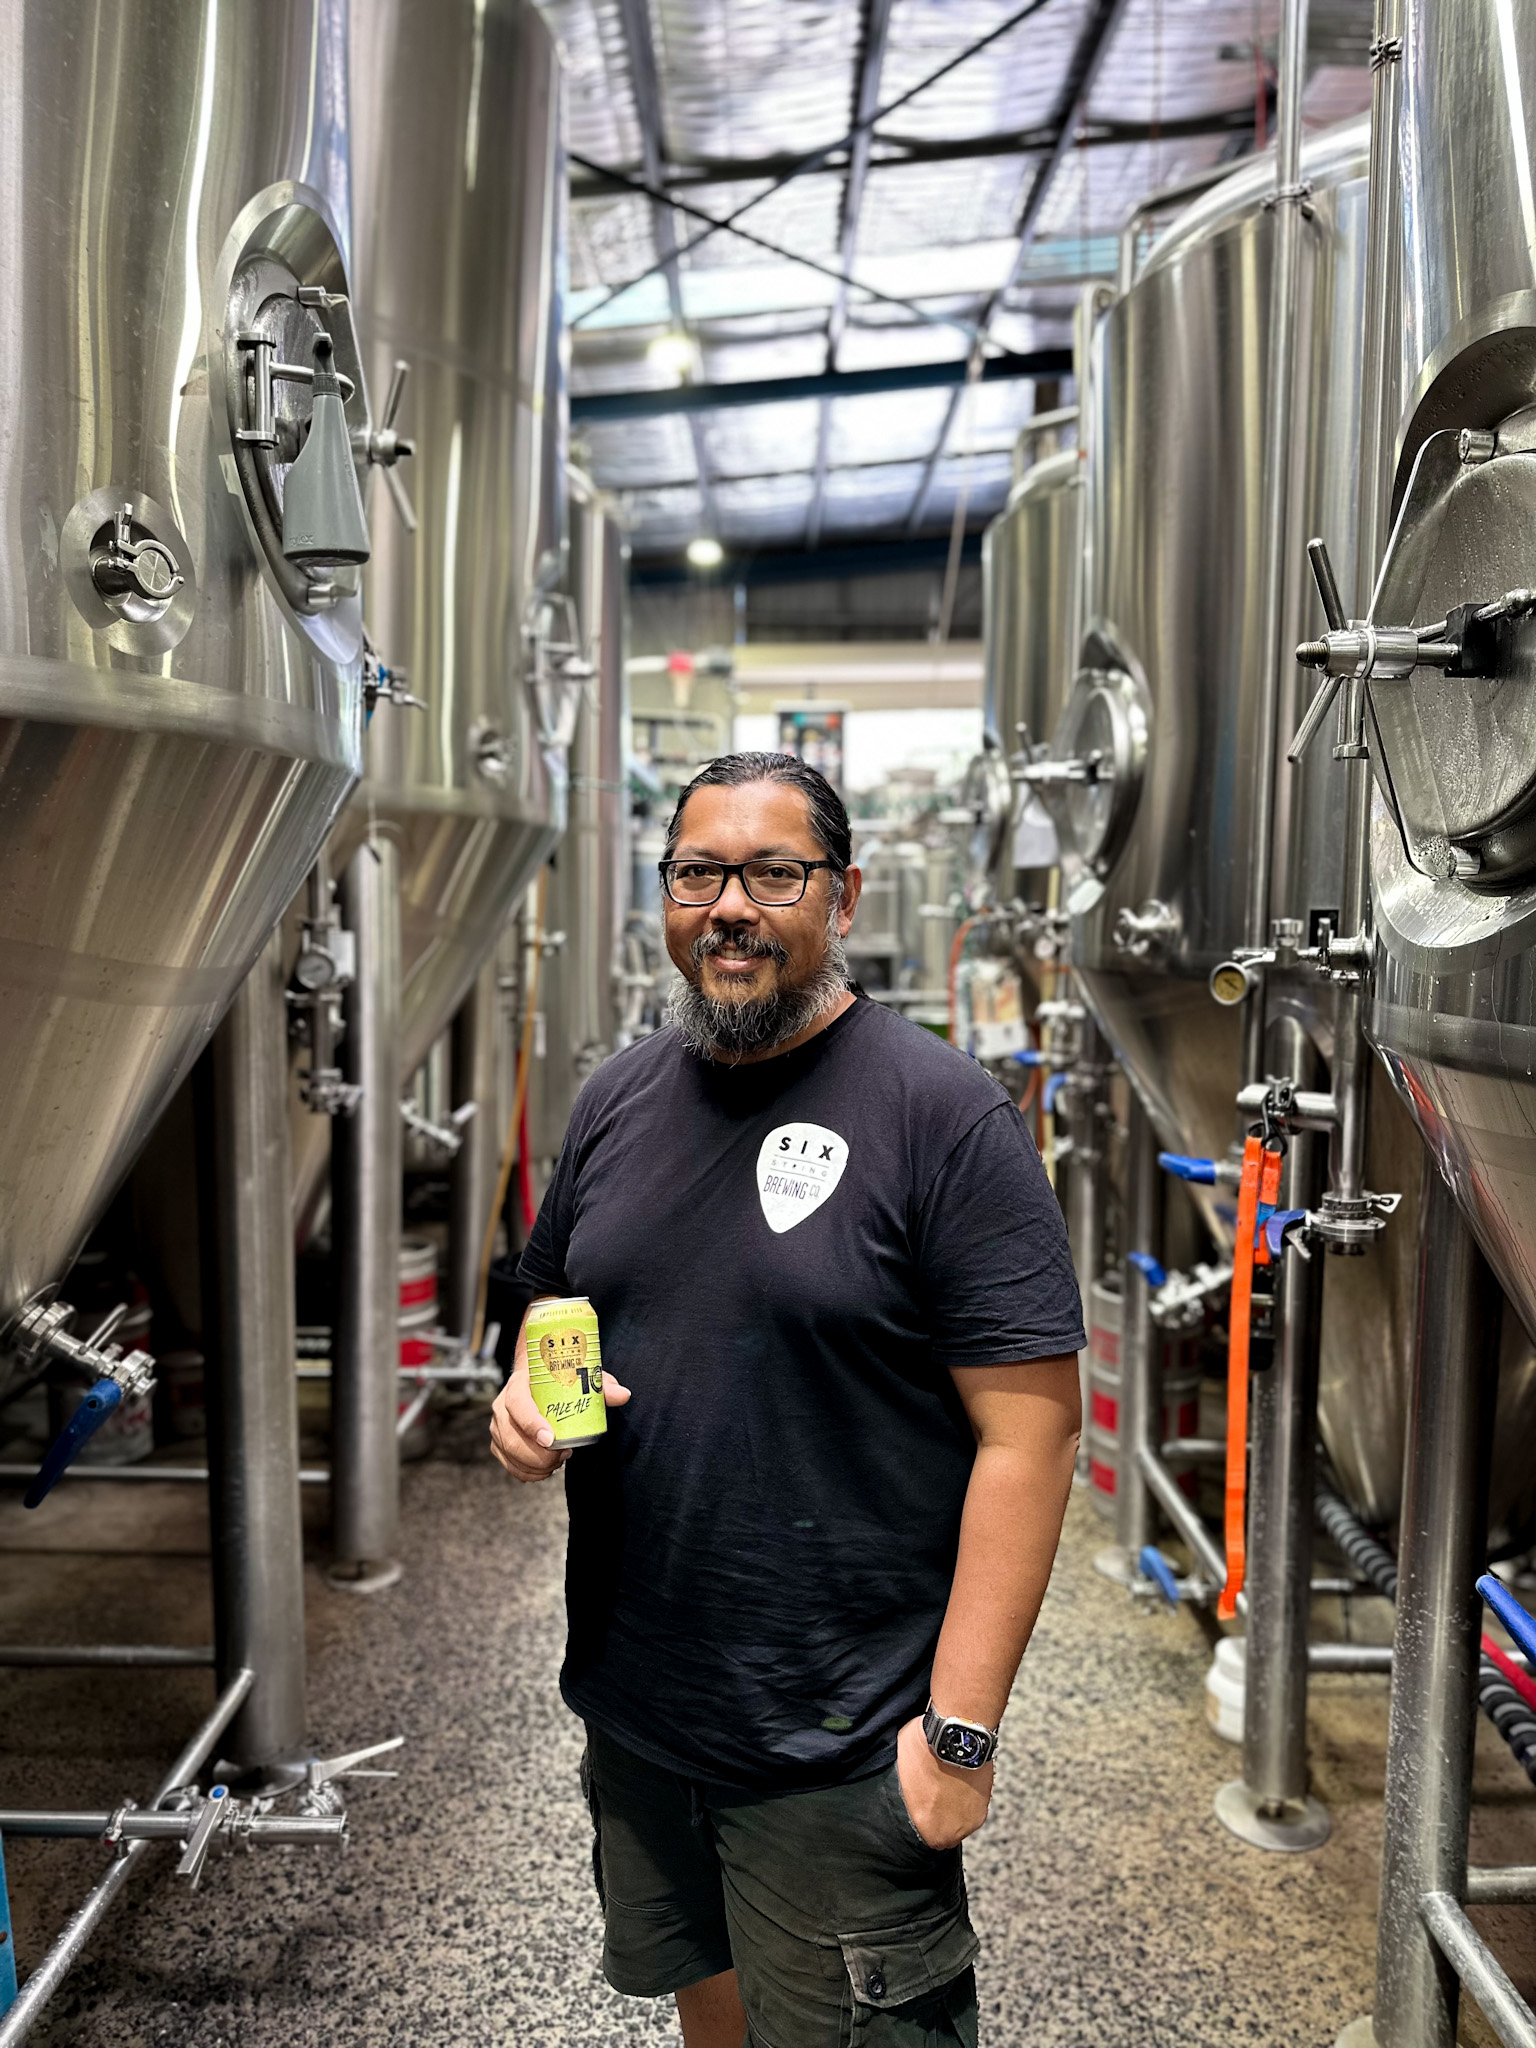 Man in a brewery holding a beer